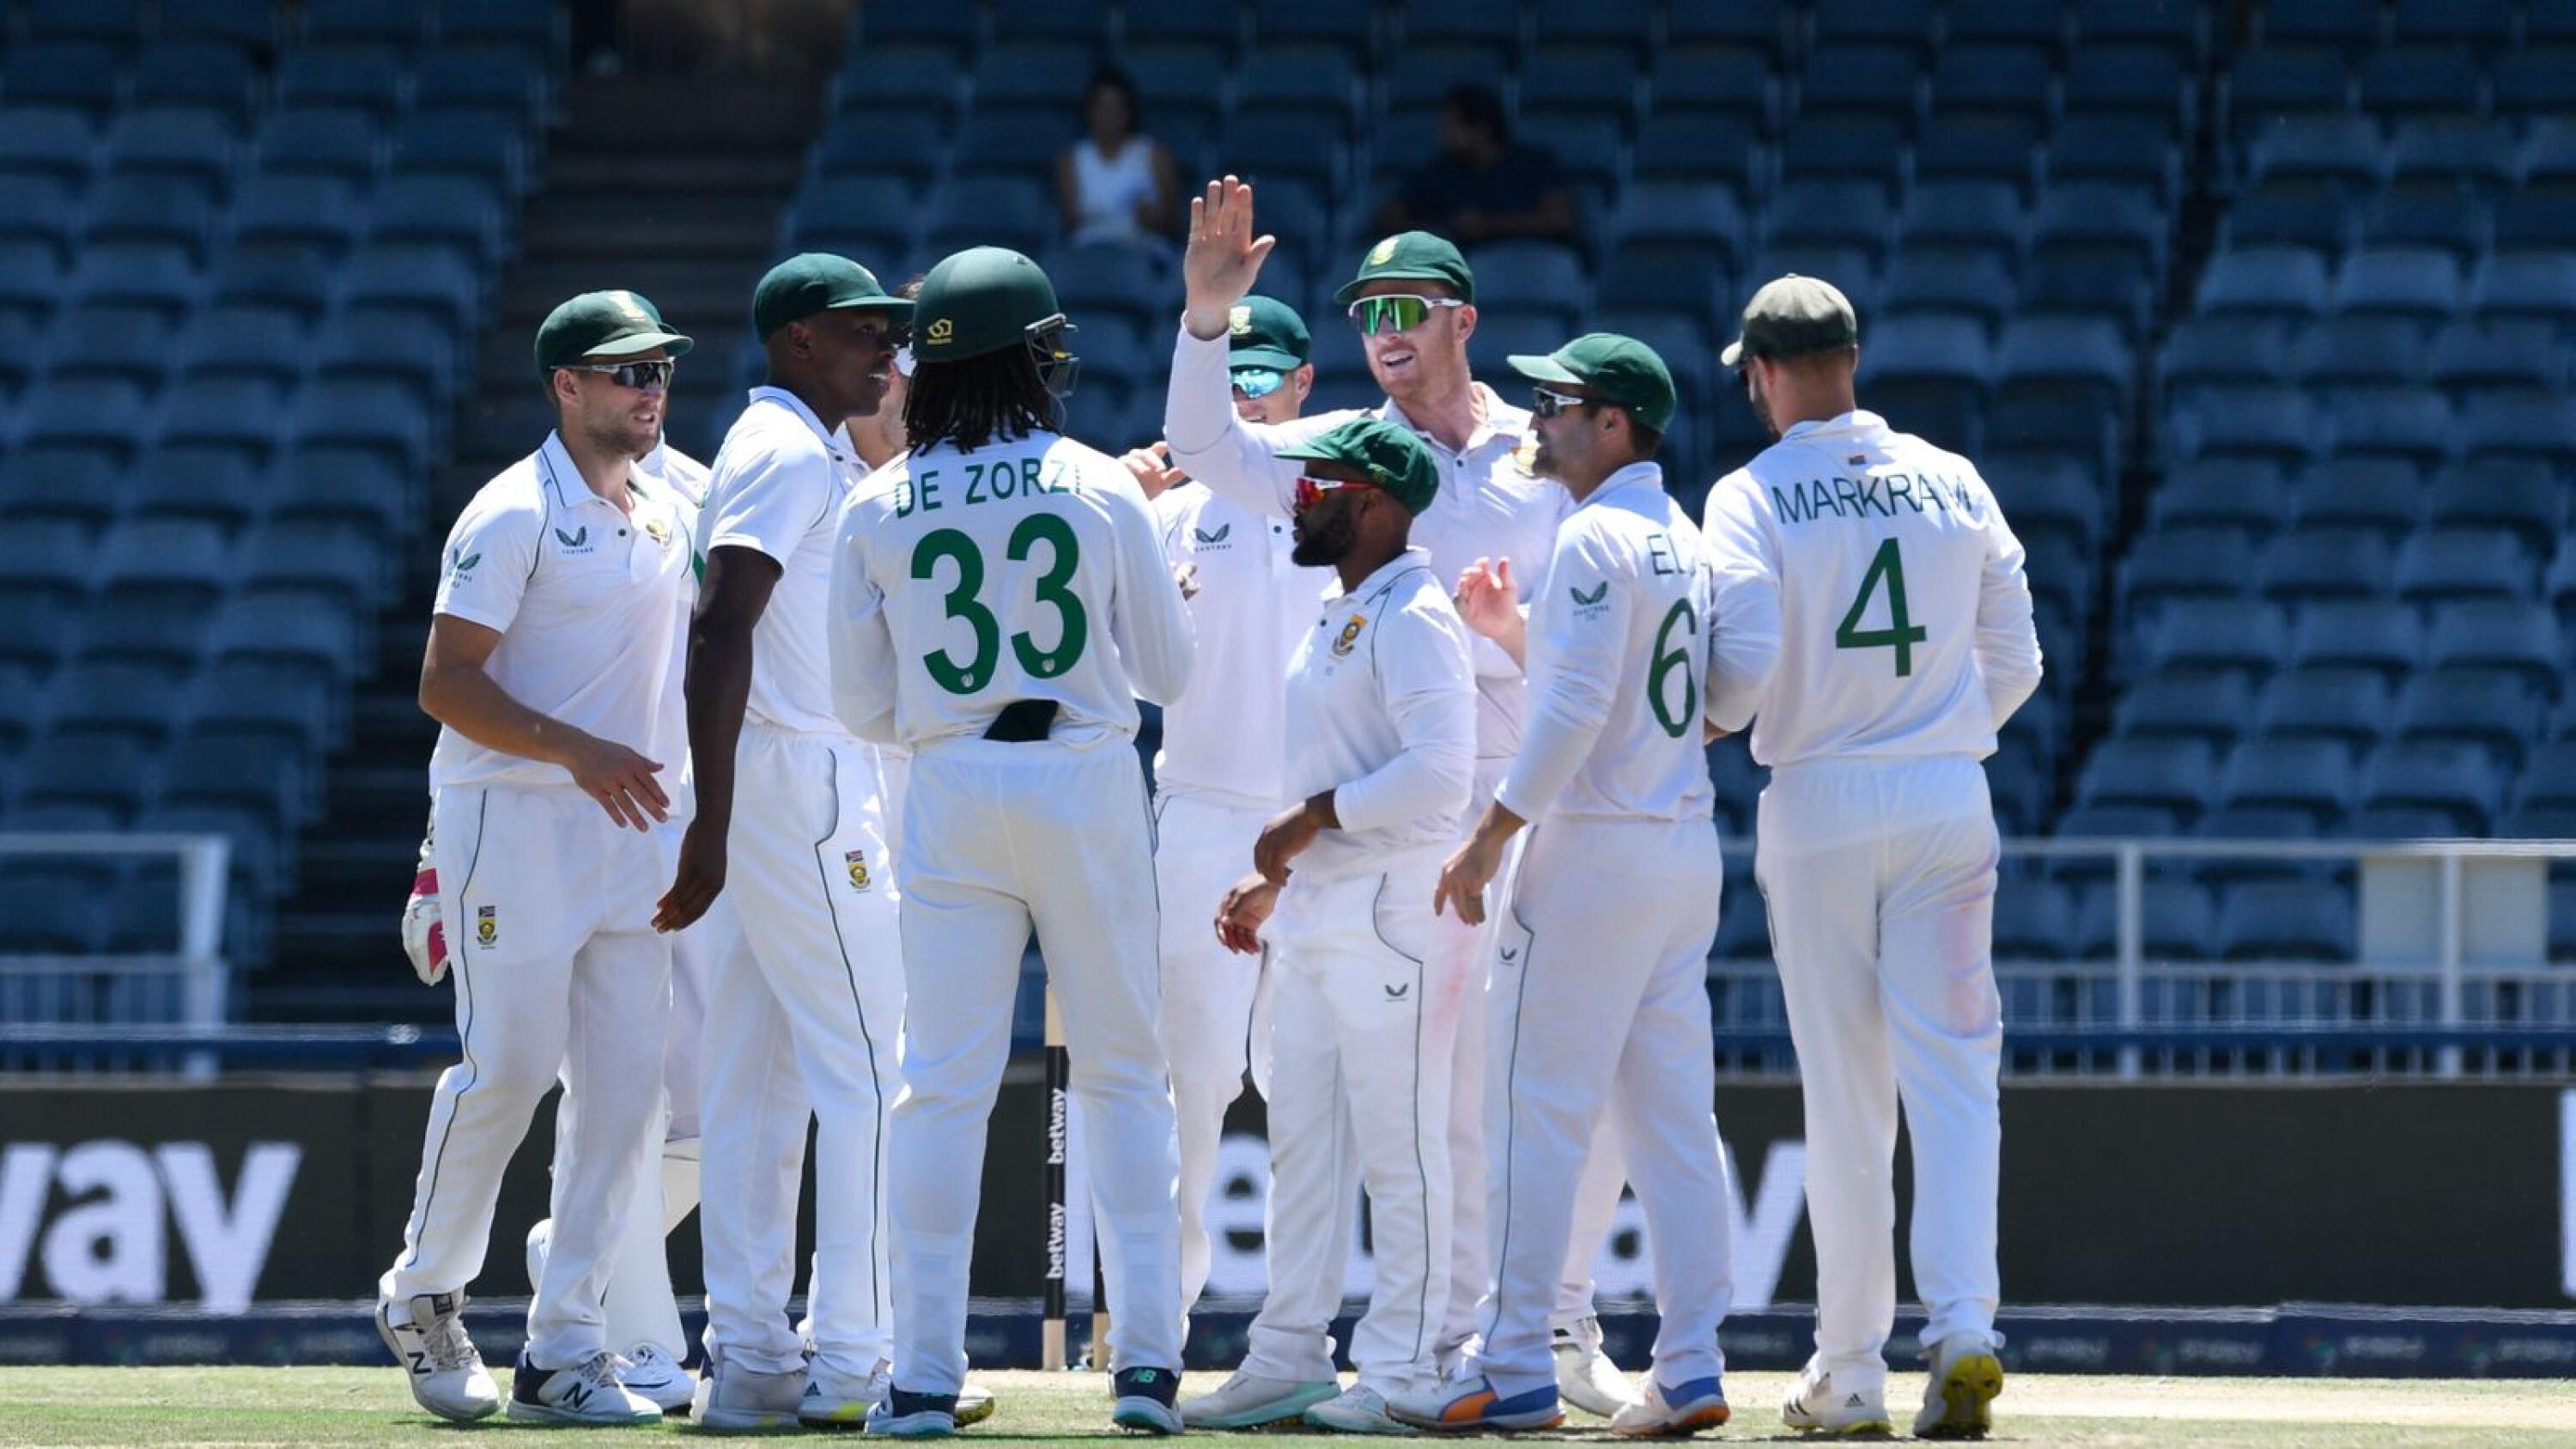 South Africa’s Gerald Coetzee celebrates with teammates after picking up a wicket during day two of their second Test against The West Indies at the Wanderers in Johannesburg on Thursday